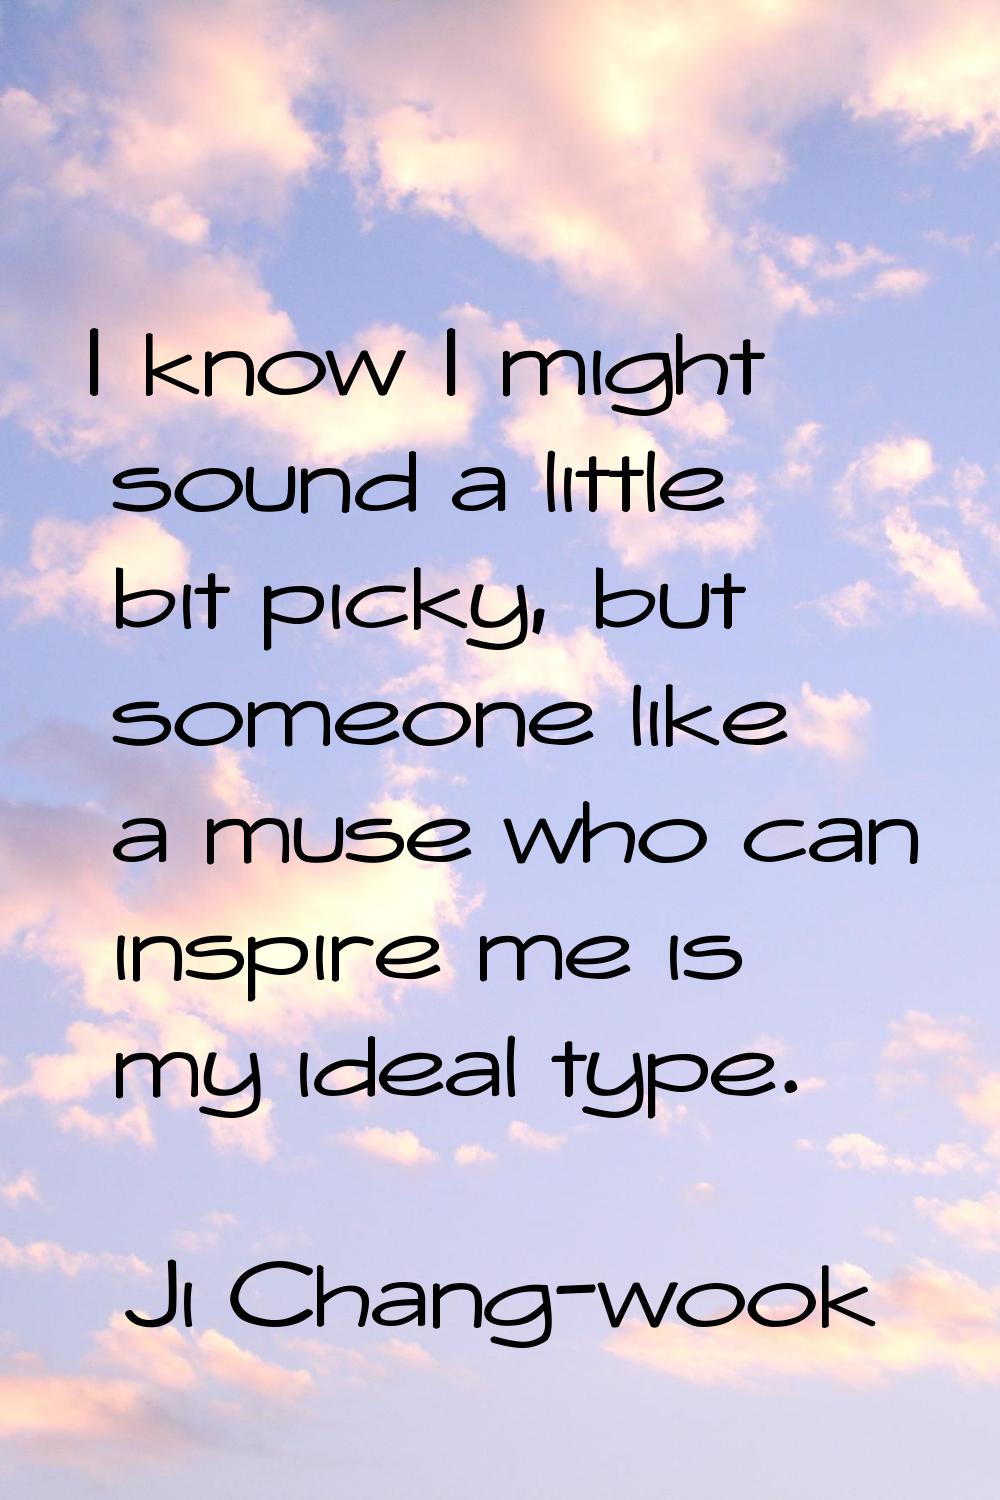 I know I might sound a little bit picky, but someone like a muse who can inspire me is my ideal typ